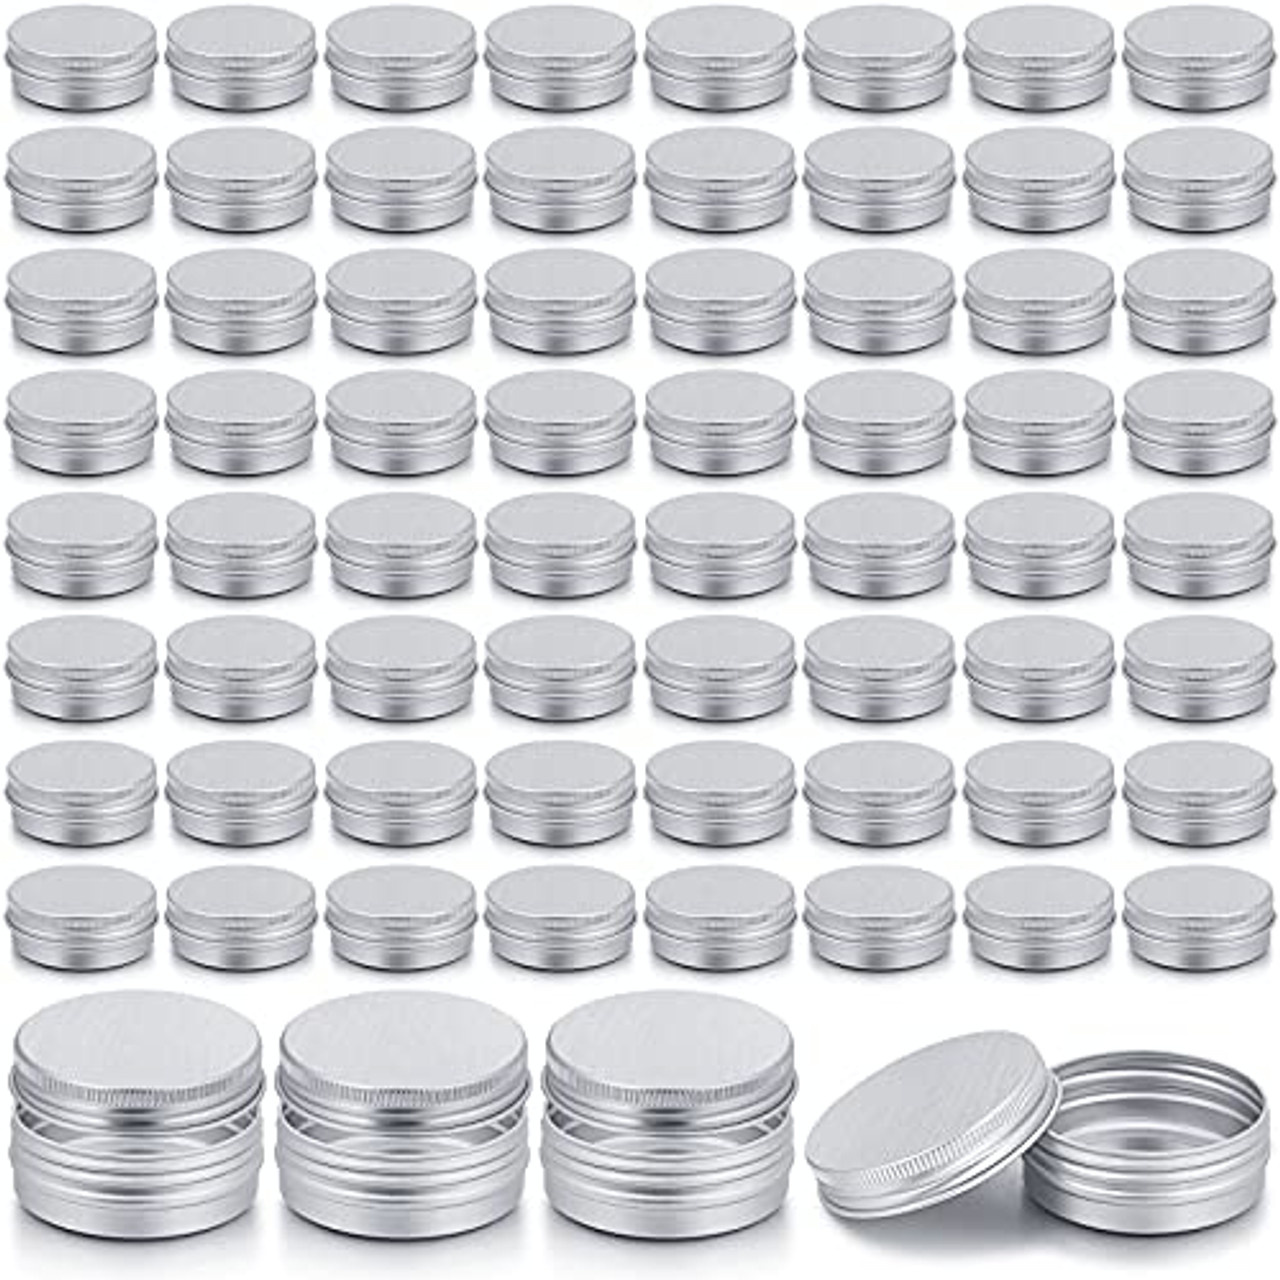 64 Pieces Screw Top Round Tin Cans Aluminum Tin Jar with Screw Lid, Lip  Balm Tin Containers Bottle Empty Travel Cosmetic Sample Tin Cans Container  for DIY (Silver, 1 oz)